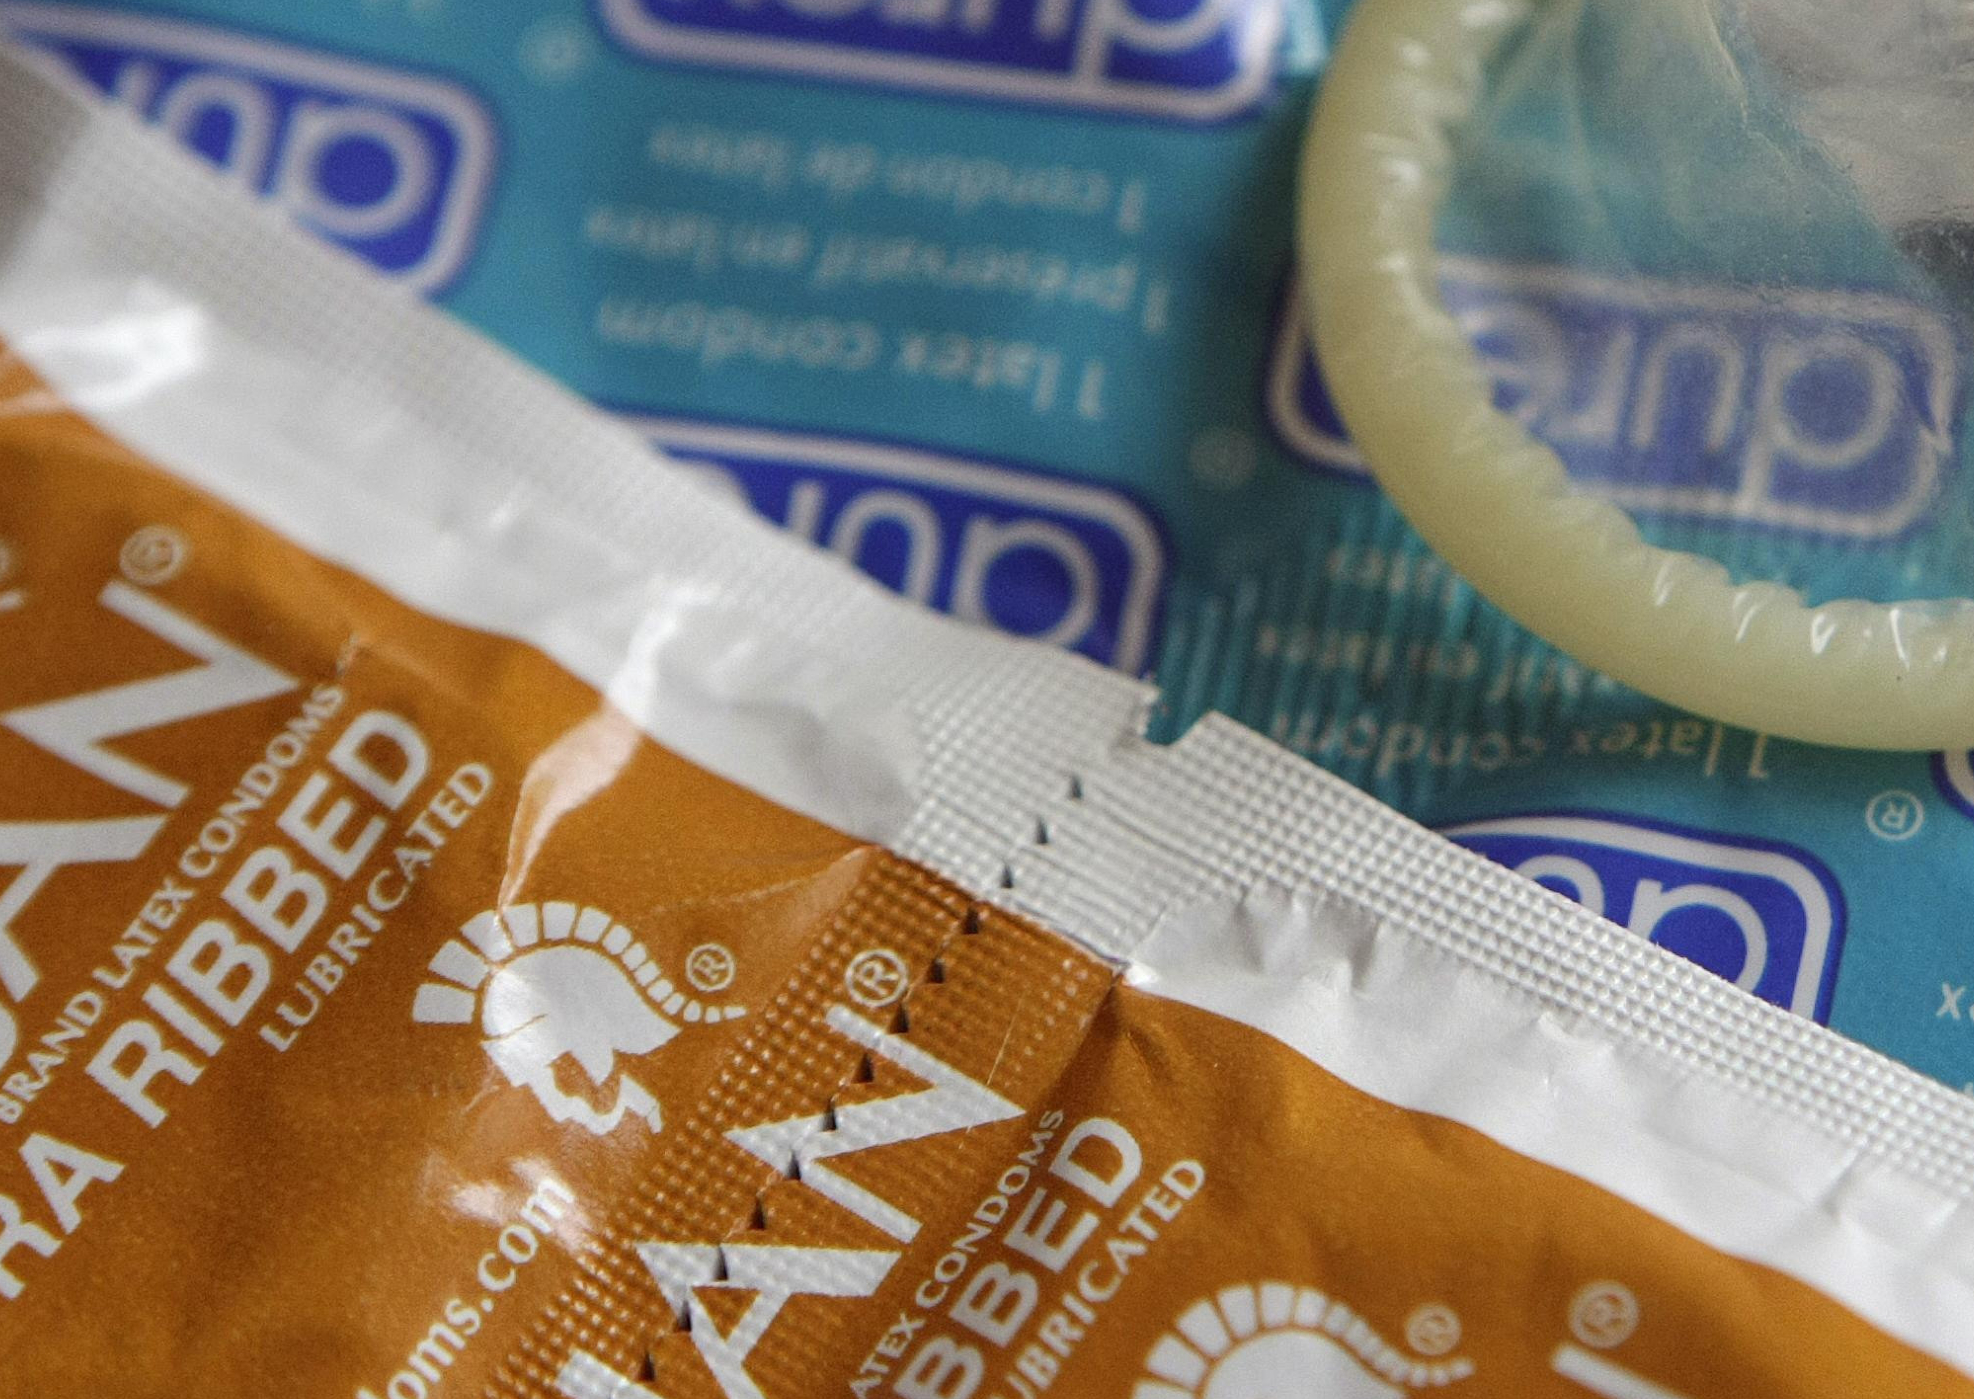 File photo of condoms. Image: Niall Carson/PA Archive/PA Images. Image: 15-04-2009